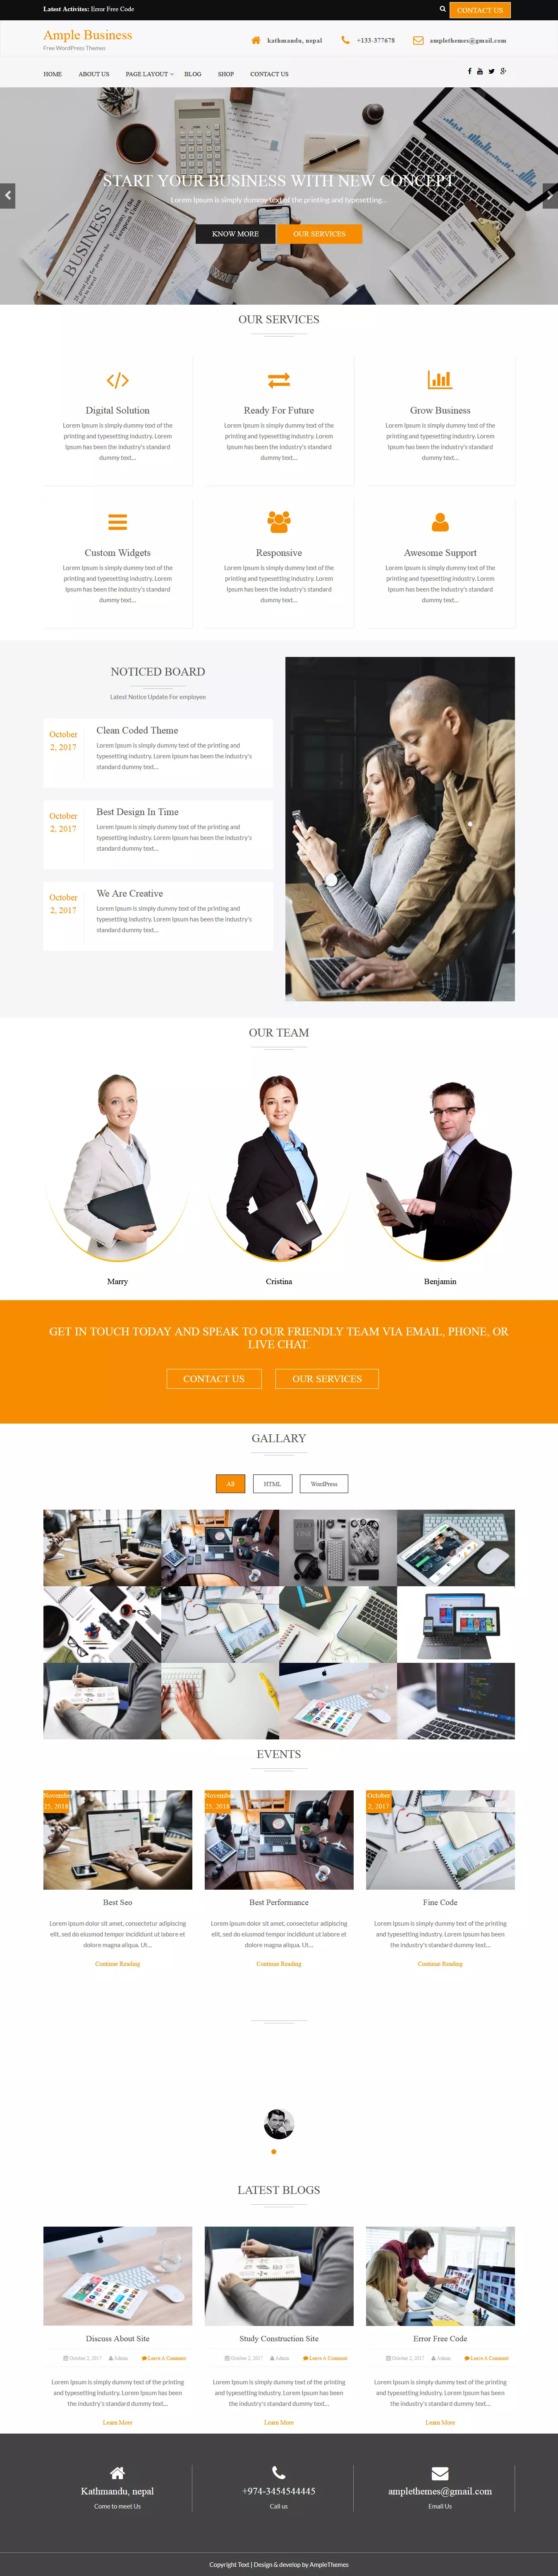 Ample Business - Best Free Consulting WordPress Theme